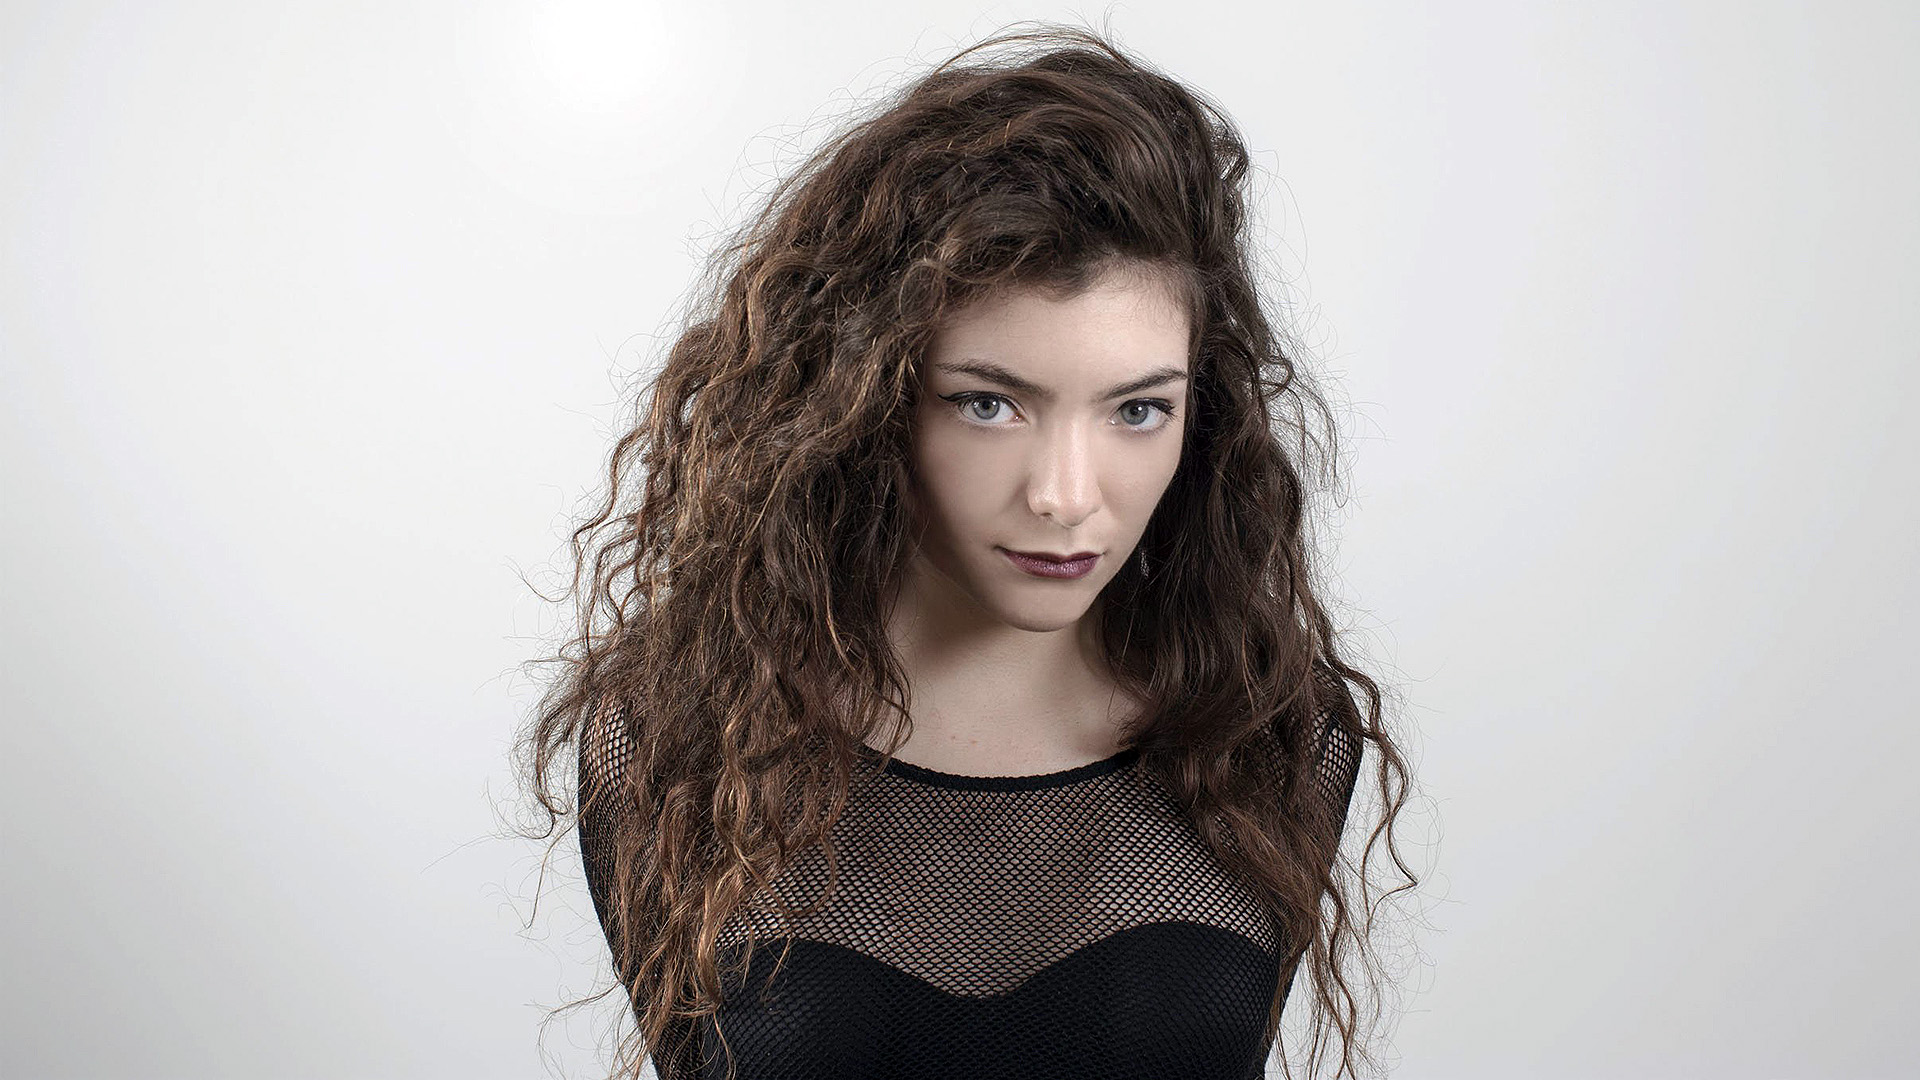 Lorde Image HD Wallpaper And Background Photos